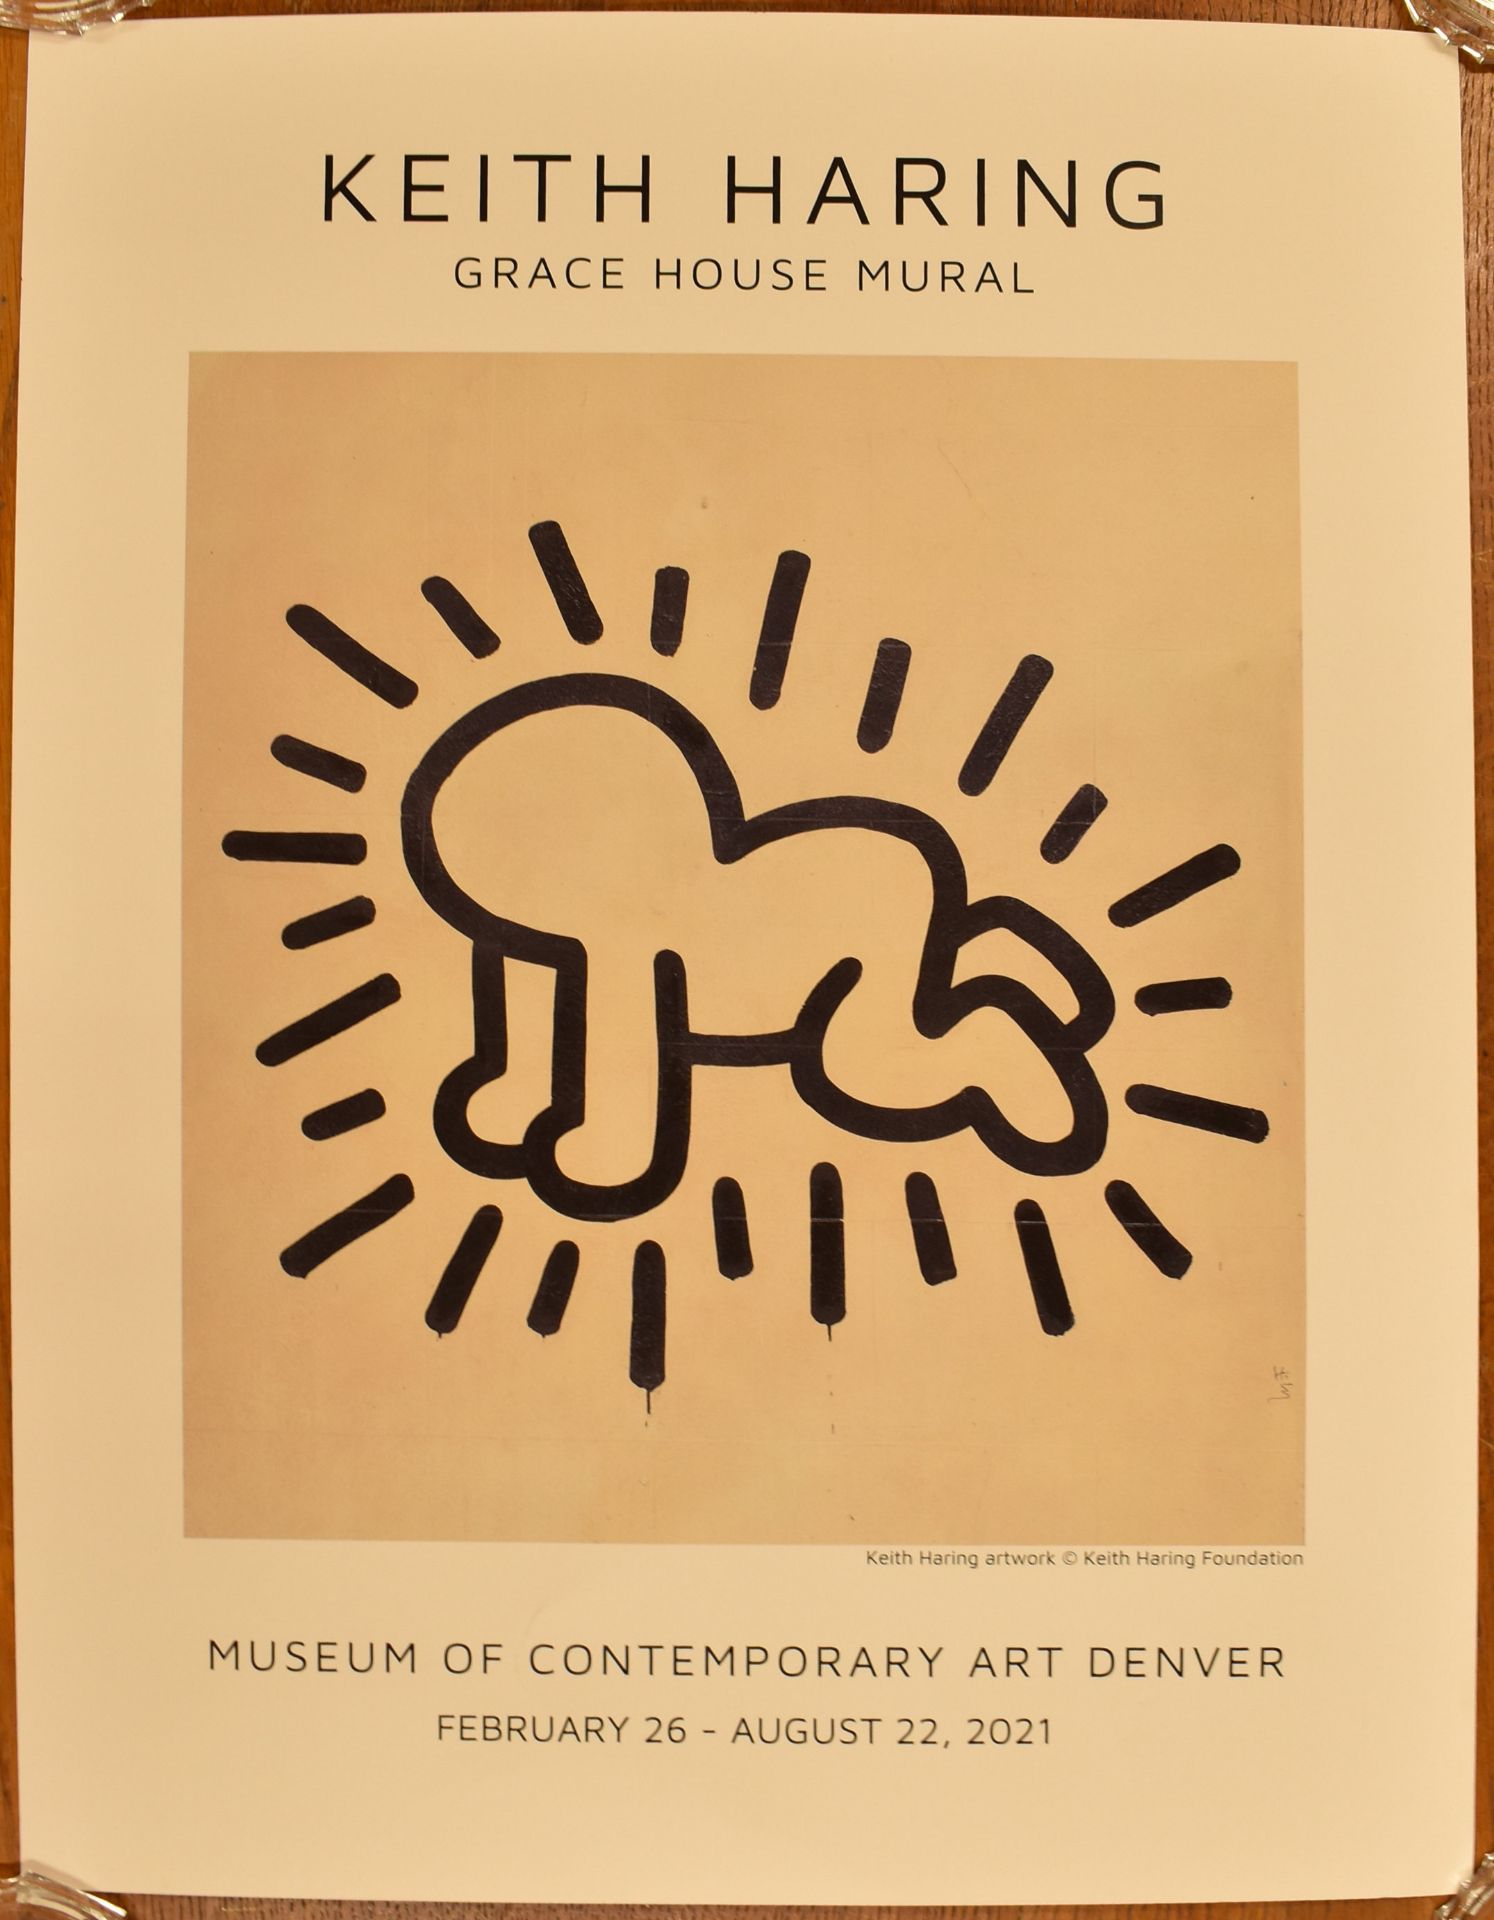 KEITH HARING - GRACE HOUSE MURAL, 2021 EXHIBITION POSTER - Image 2 of 4